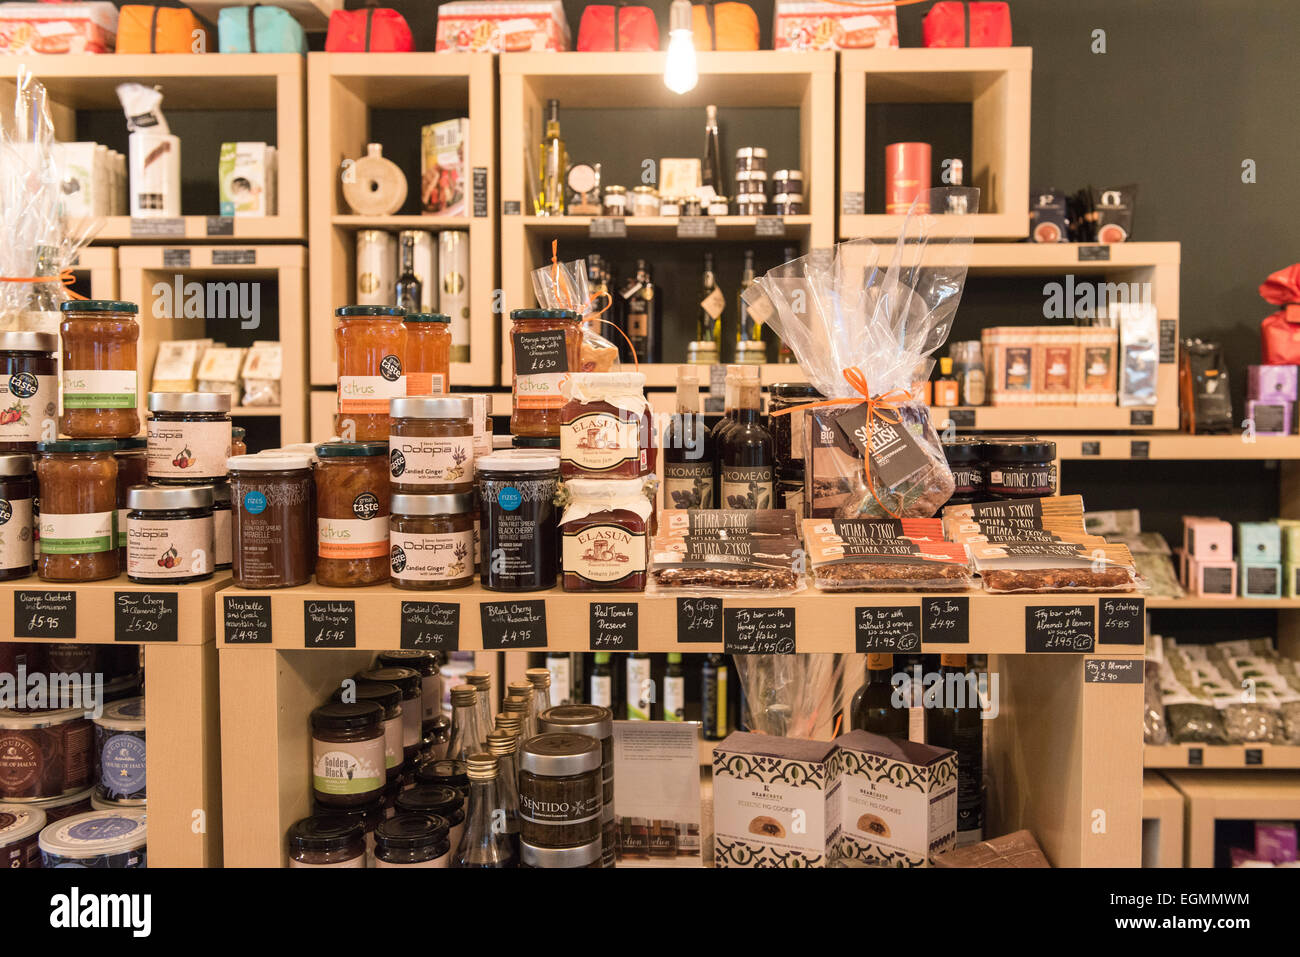 interior of posh luxury gourmet food and drink shop, showing the shelves packed with tasty food products like cheeses & jams etc Stock Photo